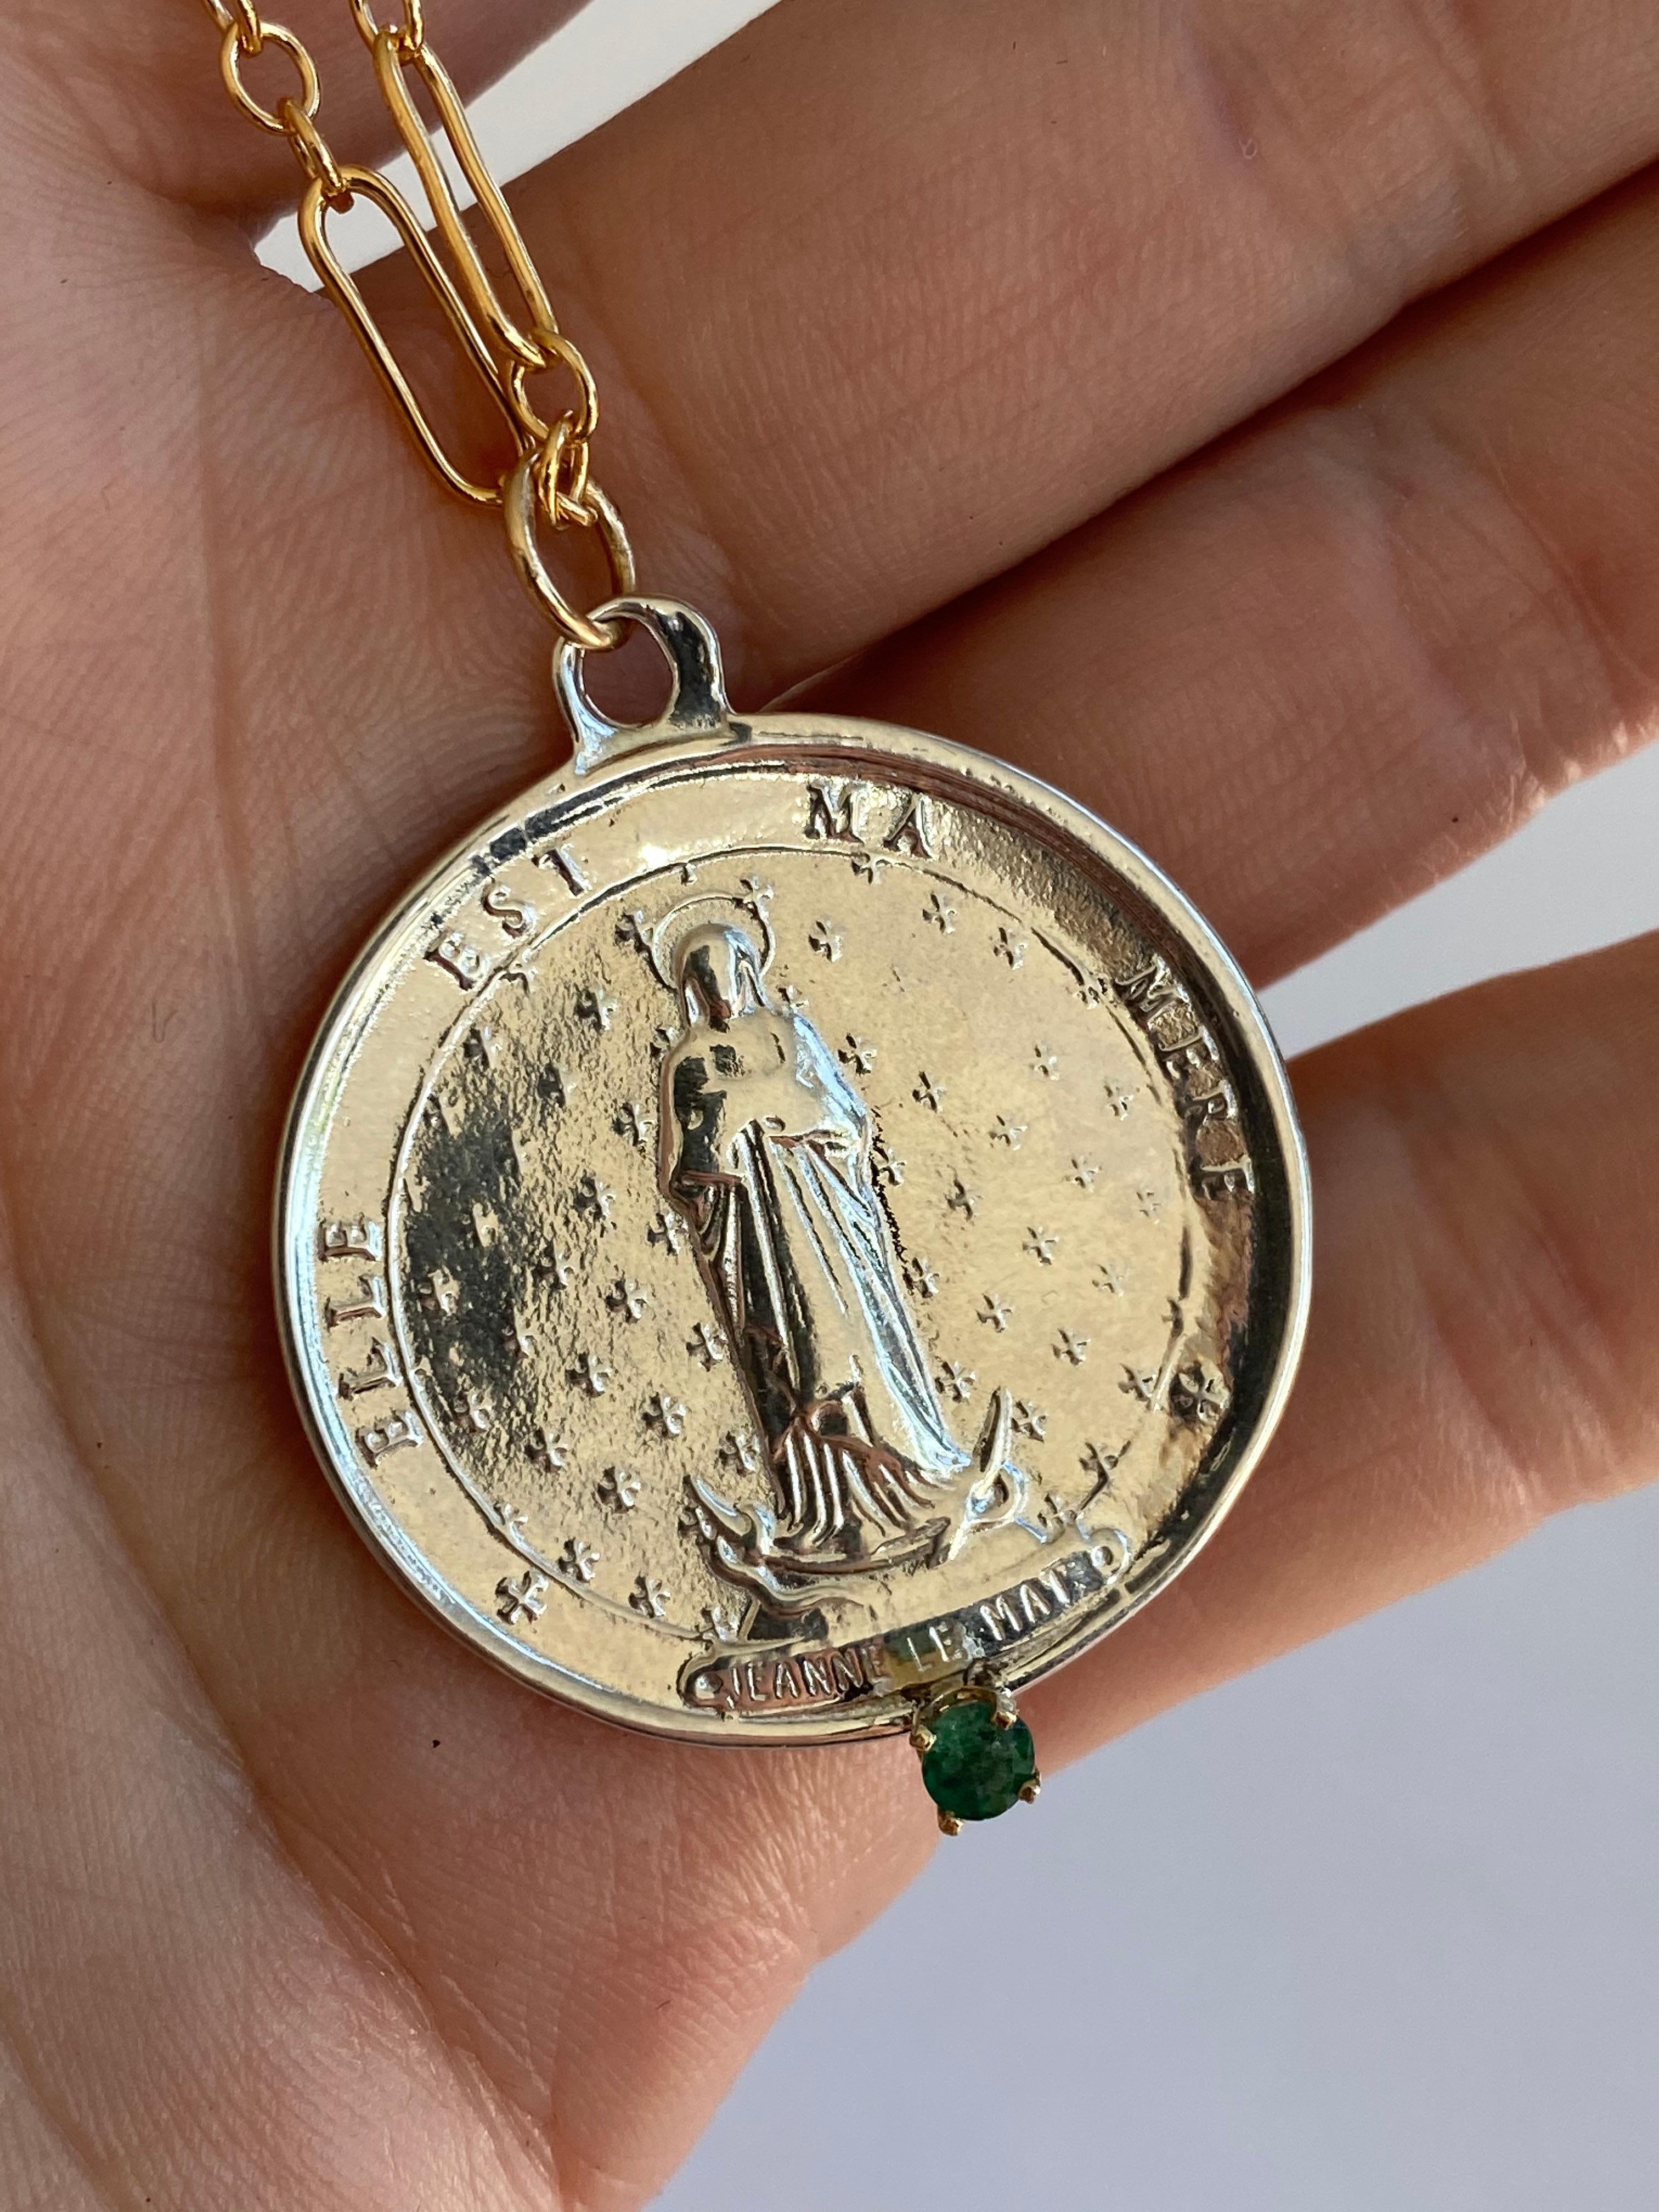 Emerald Saint Medal Coin Silver Jeanne Le Mat Necklace Gold Filled Chain J Dauphin

Exclusive piece with a Round Silver Medal Coin with French Saint Jeanne Le Mat and an Emerald set in a Gold prong hanging on a gold filled Chain. Necklace is 26